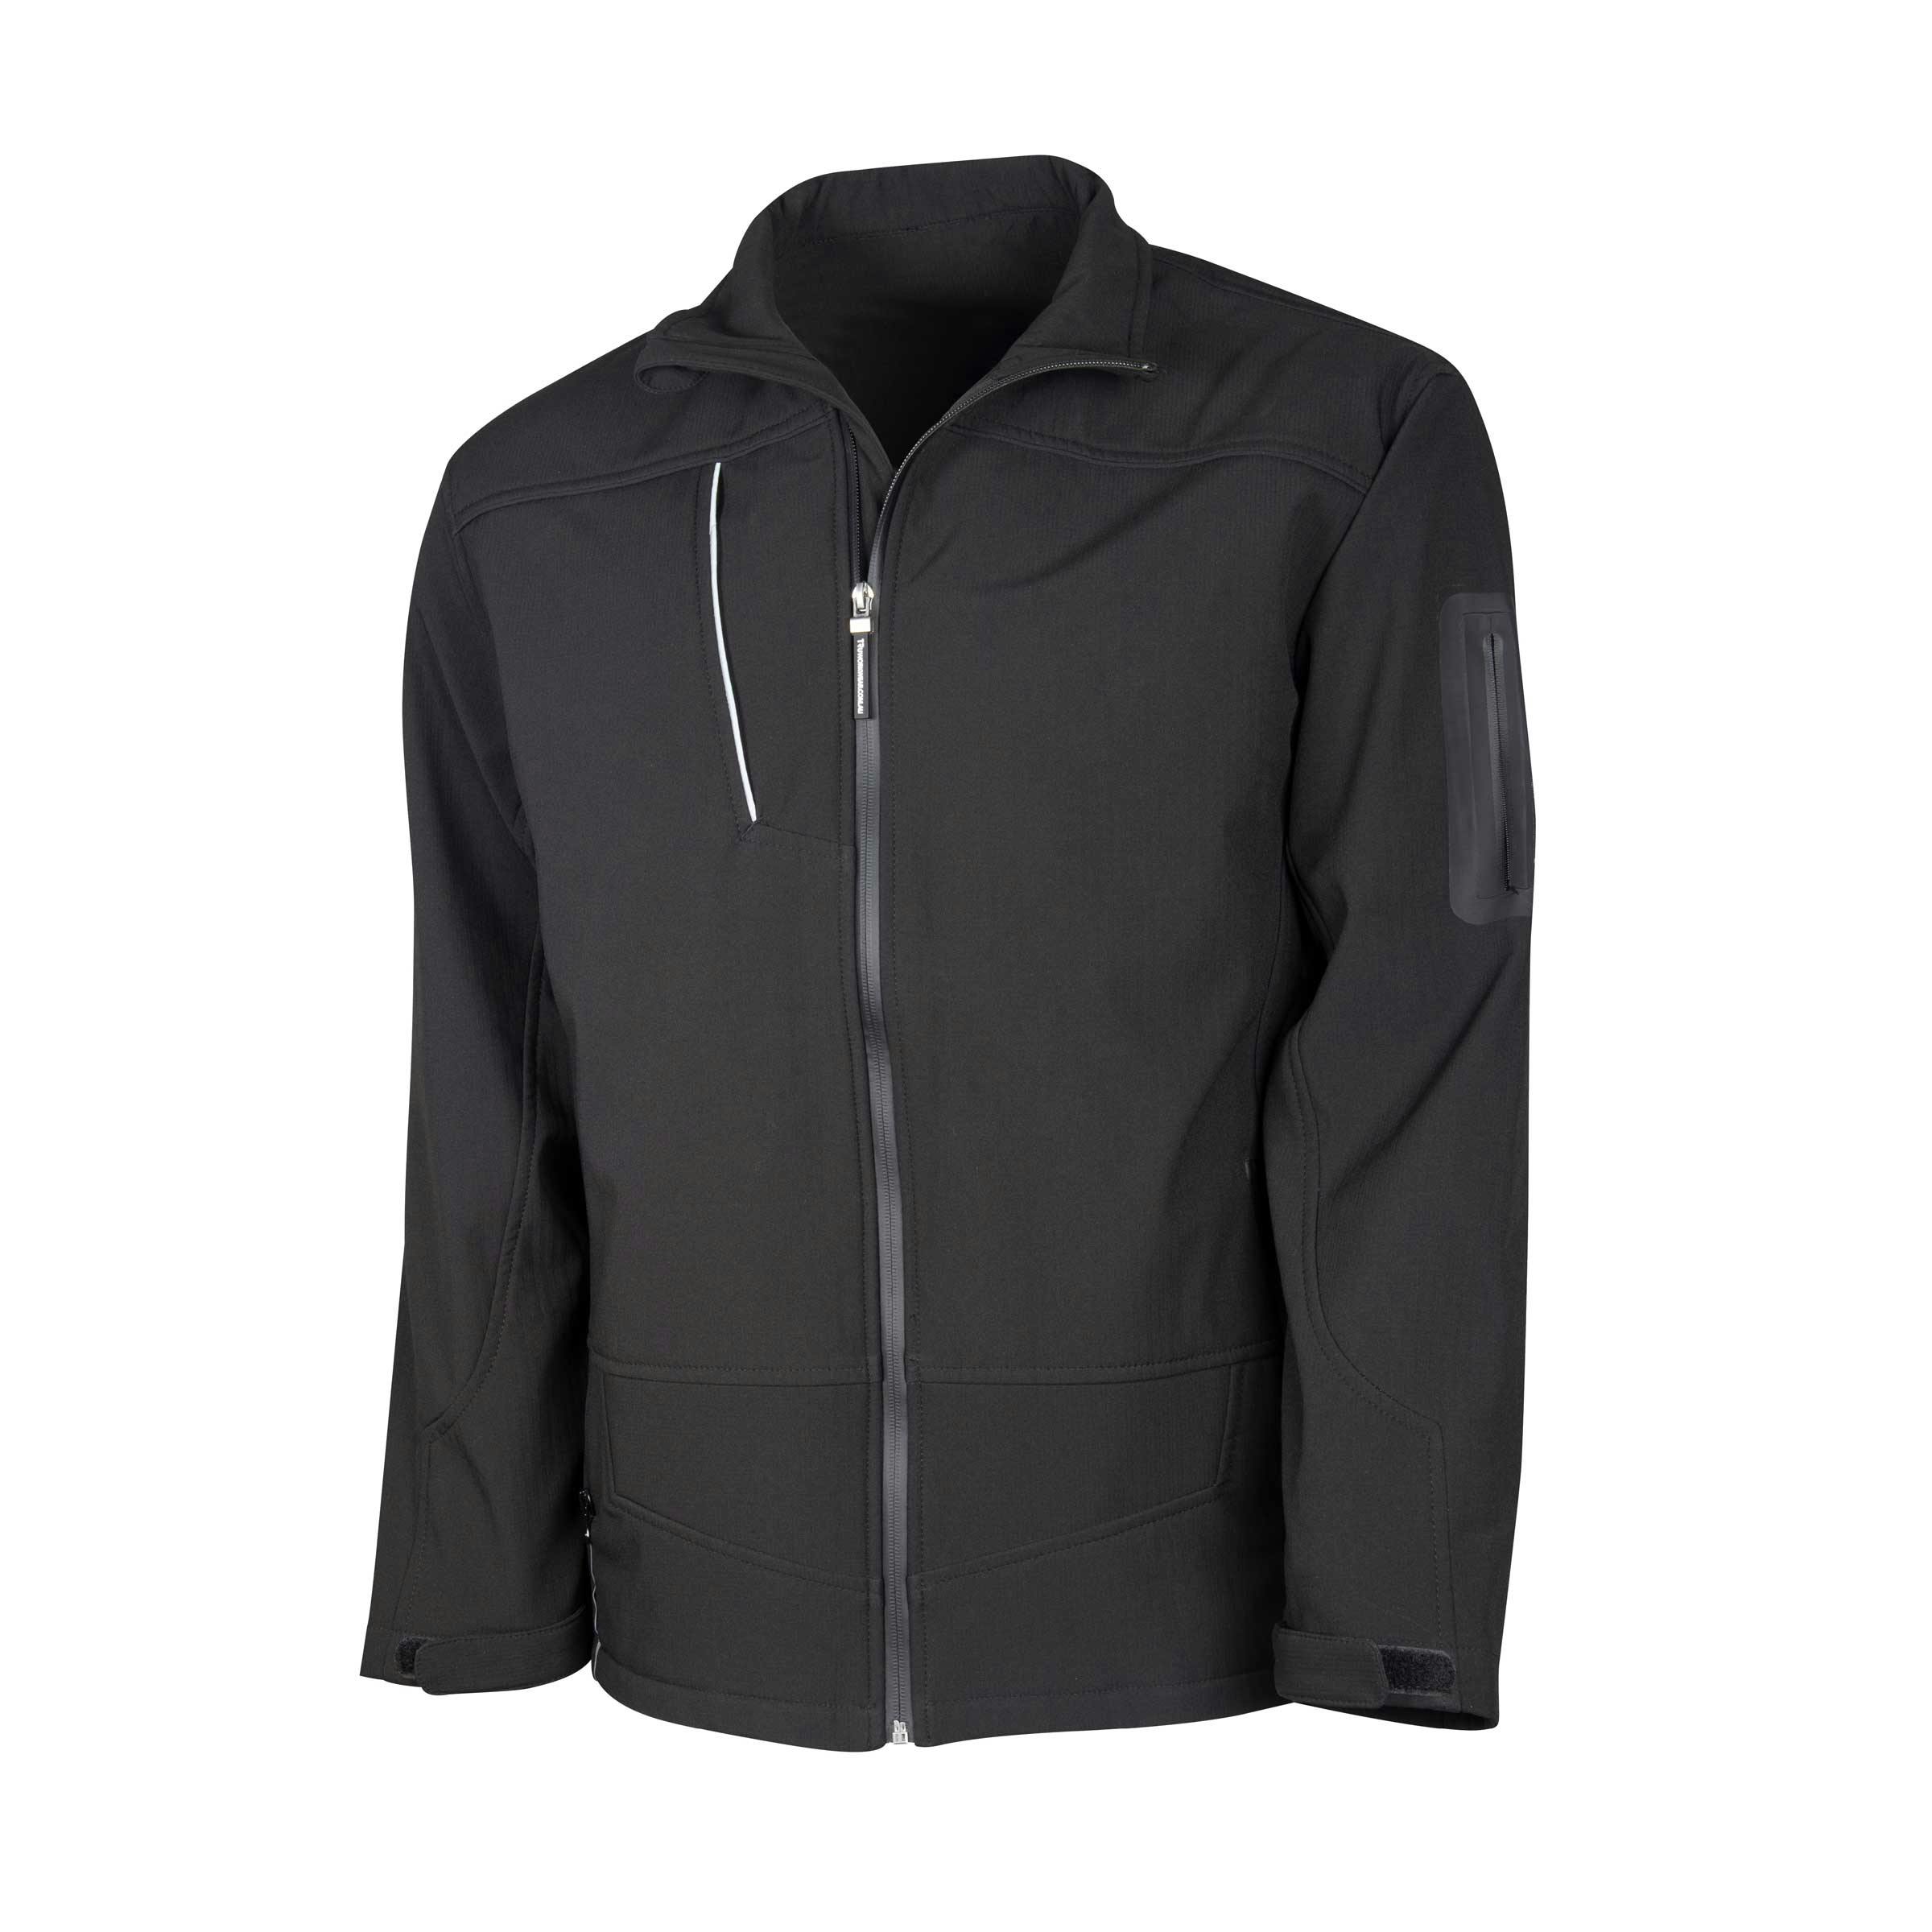 TRu Workwear Soft Shell Jacket 2 Tone 94% Polyester, 6% Spandex Laminated With Fleece, Tpu Membrane, 305gsm With Piping